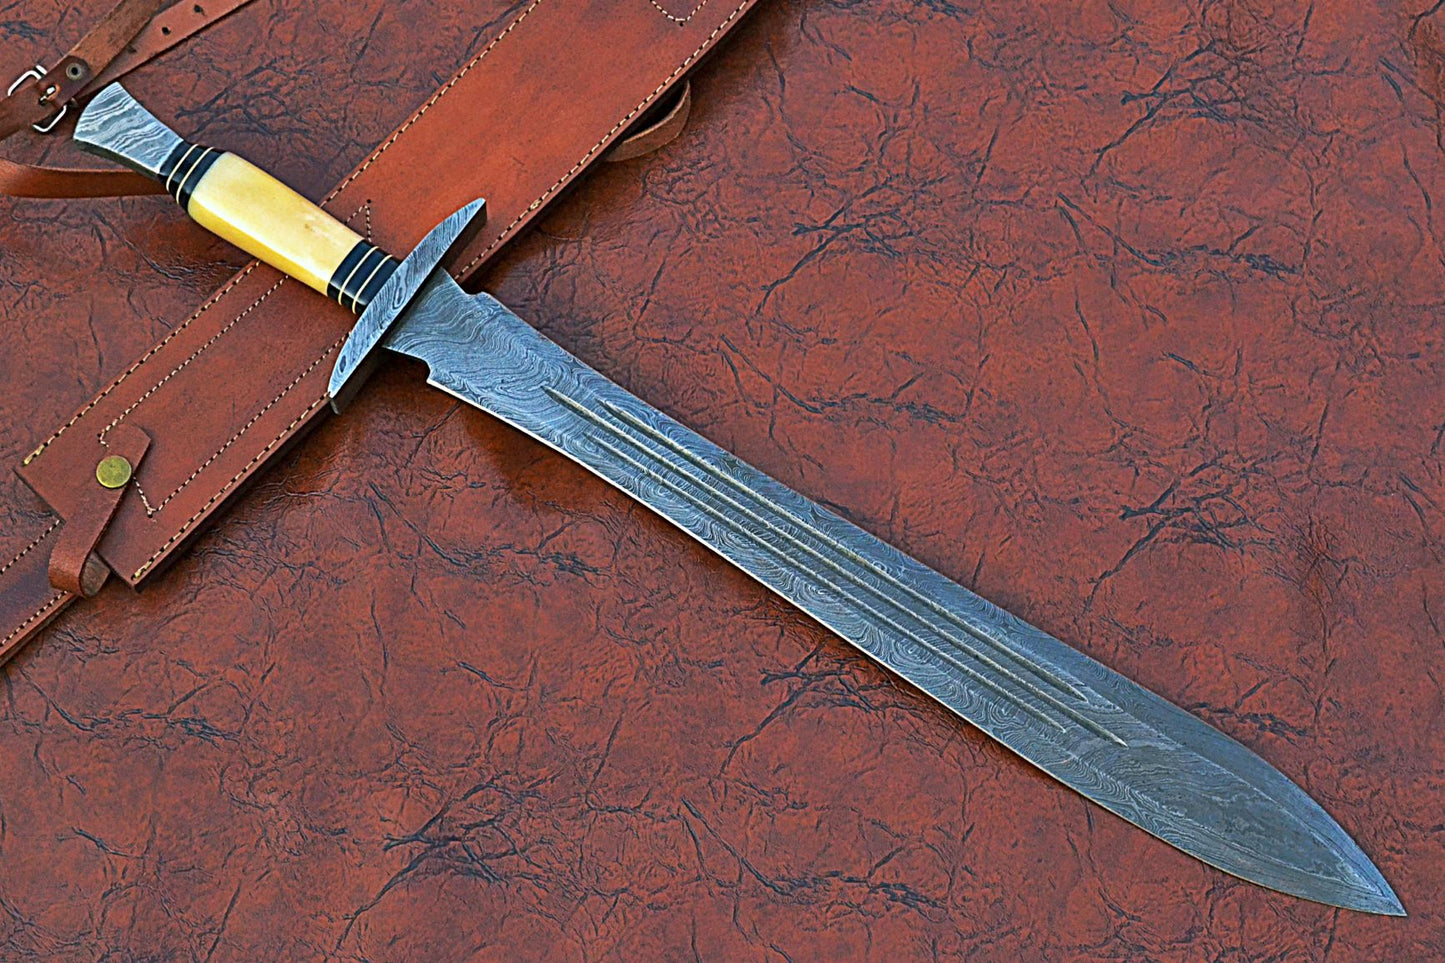 27" Long Sting Sword, 19" Long Hand Forged Damascus Steel Double Edge Blade with Triple Blood Groove, Brass Cross hilt Forward and Pommel, Damascus Guard & Pommel, Camel Bone Grip, Leather Scabbard